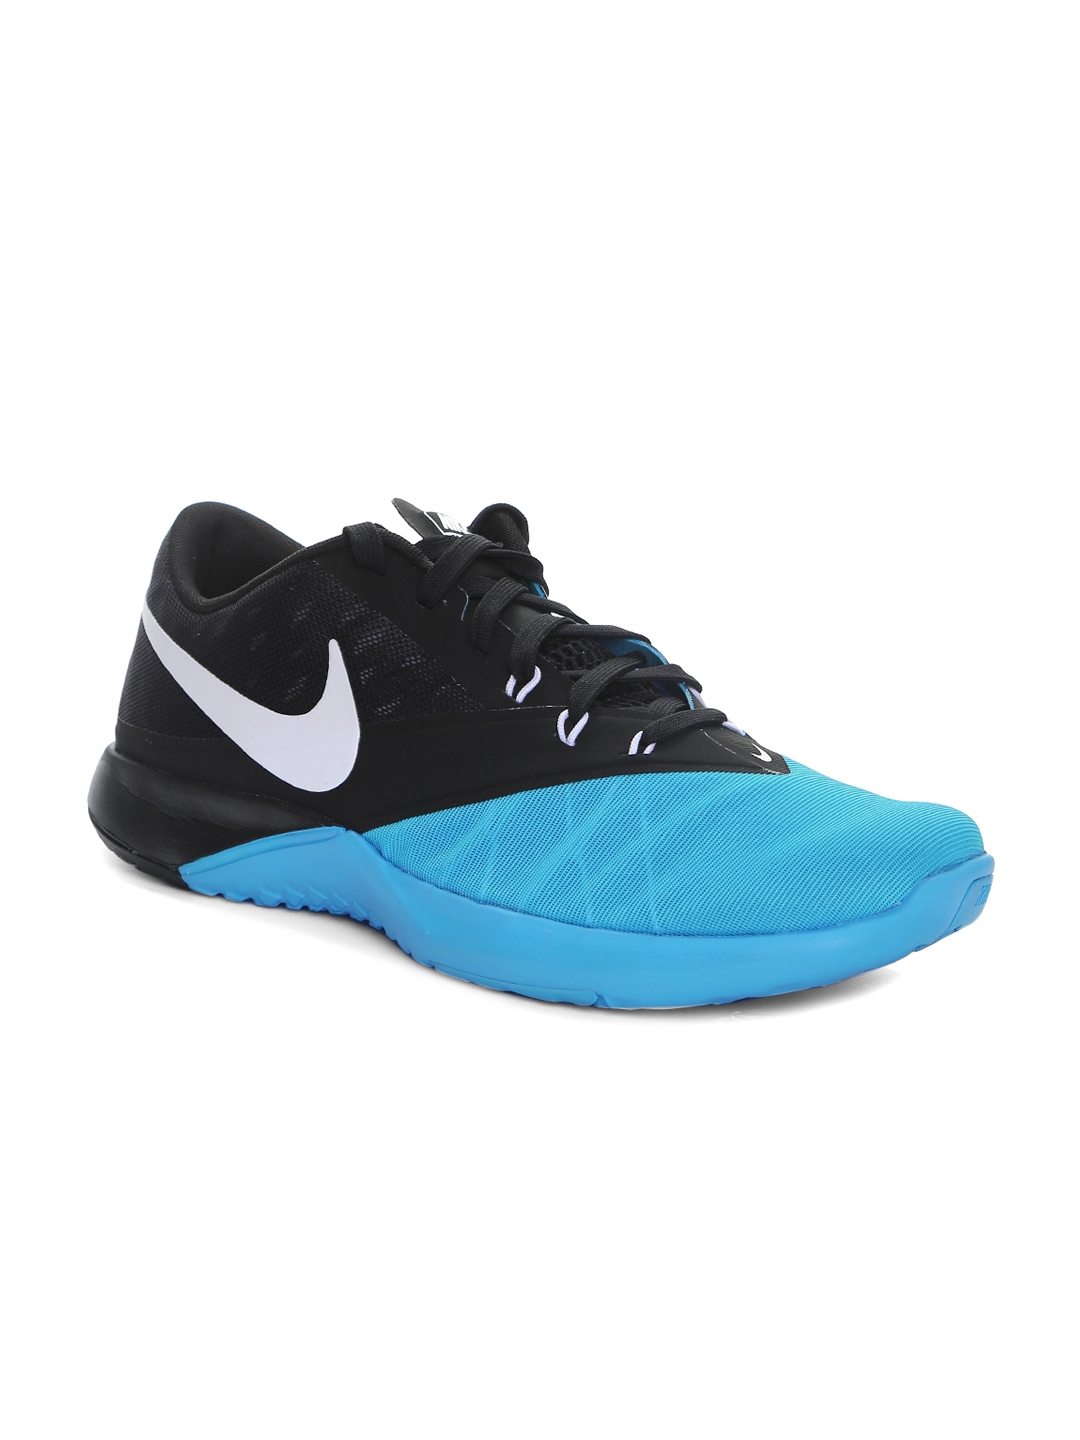 Buy Nike Men Blue & Black FS Lite Trainer 4 Training Shoes - Sports Shoes for | Myntra